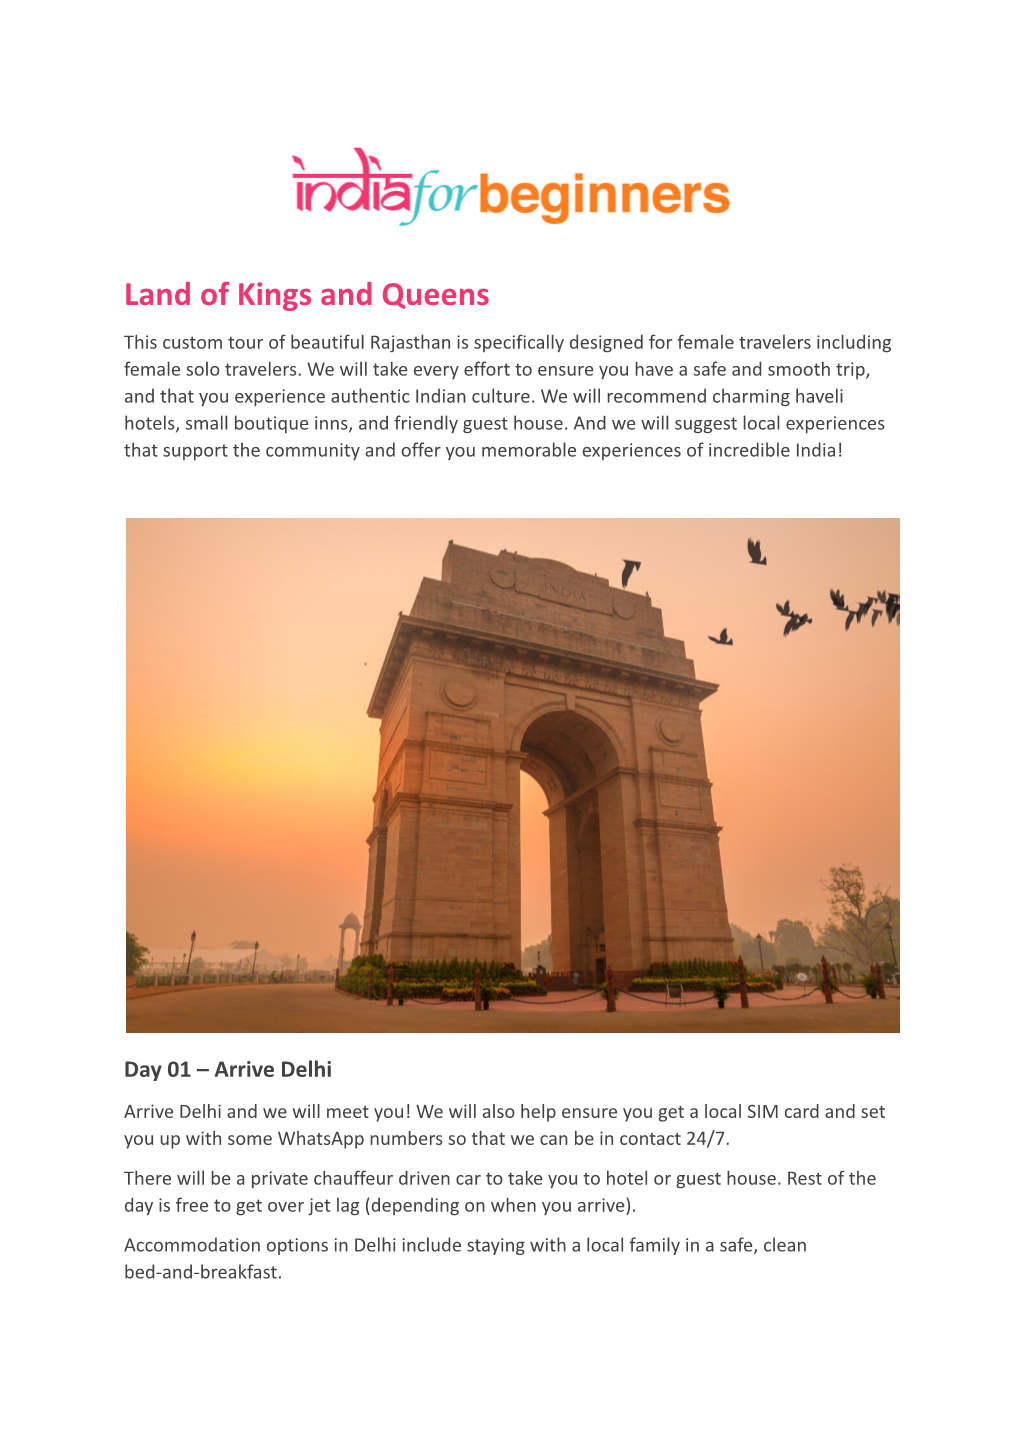 Land of Kings and Queens Rajasthan Tour Here